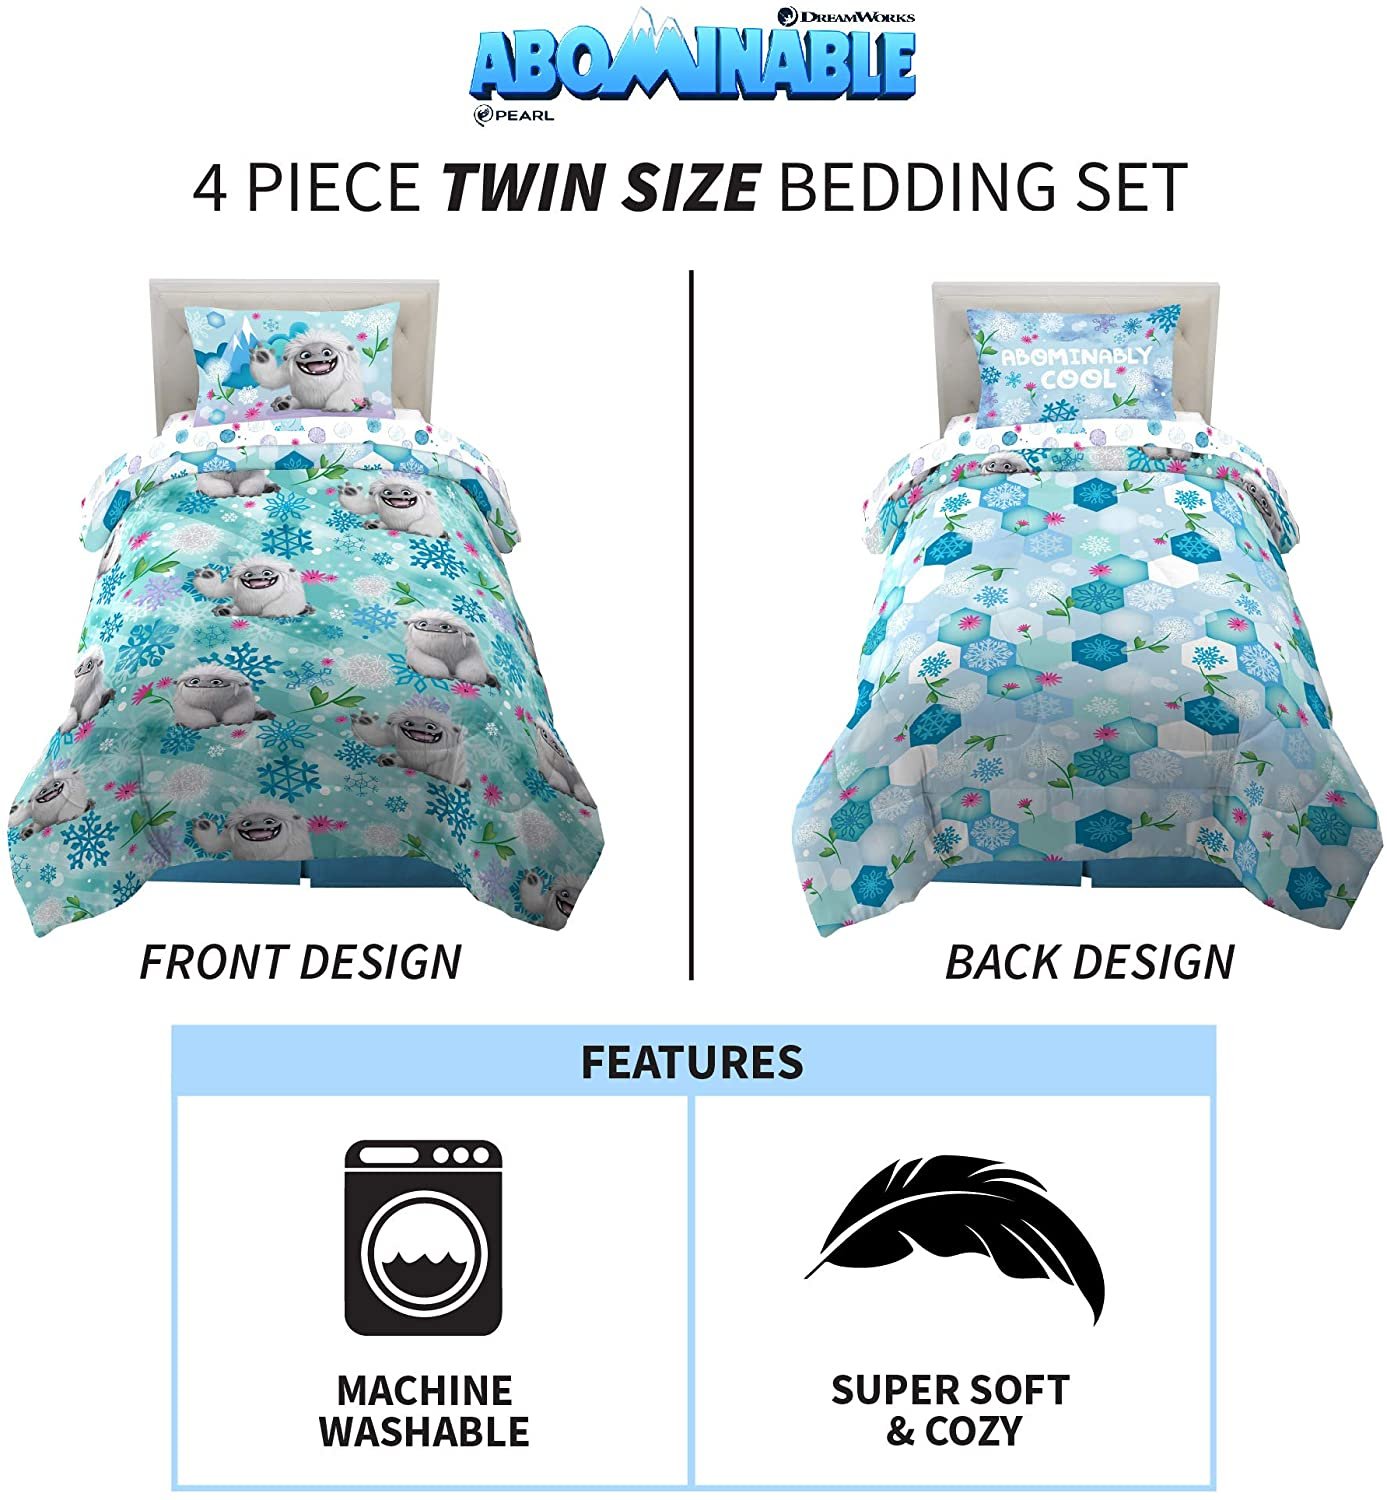 Franco Kids Bedding Comforter and Sheet Set, 4 Piece Twin Size, Abominable - image 3 of 9